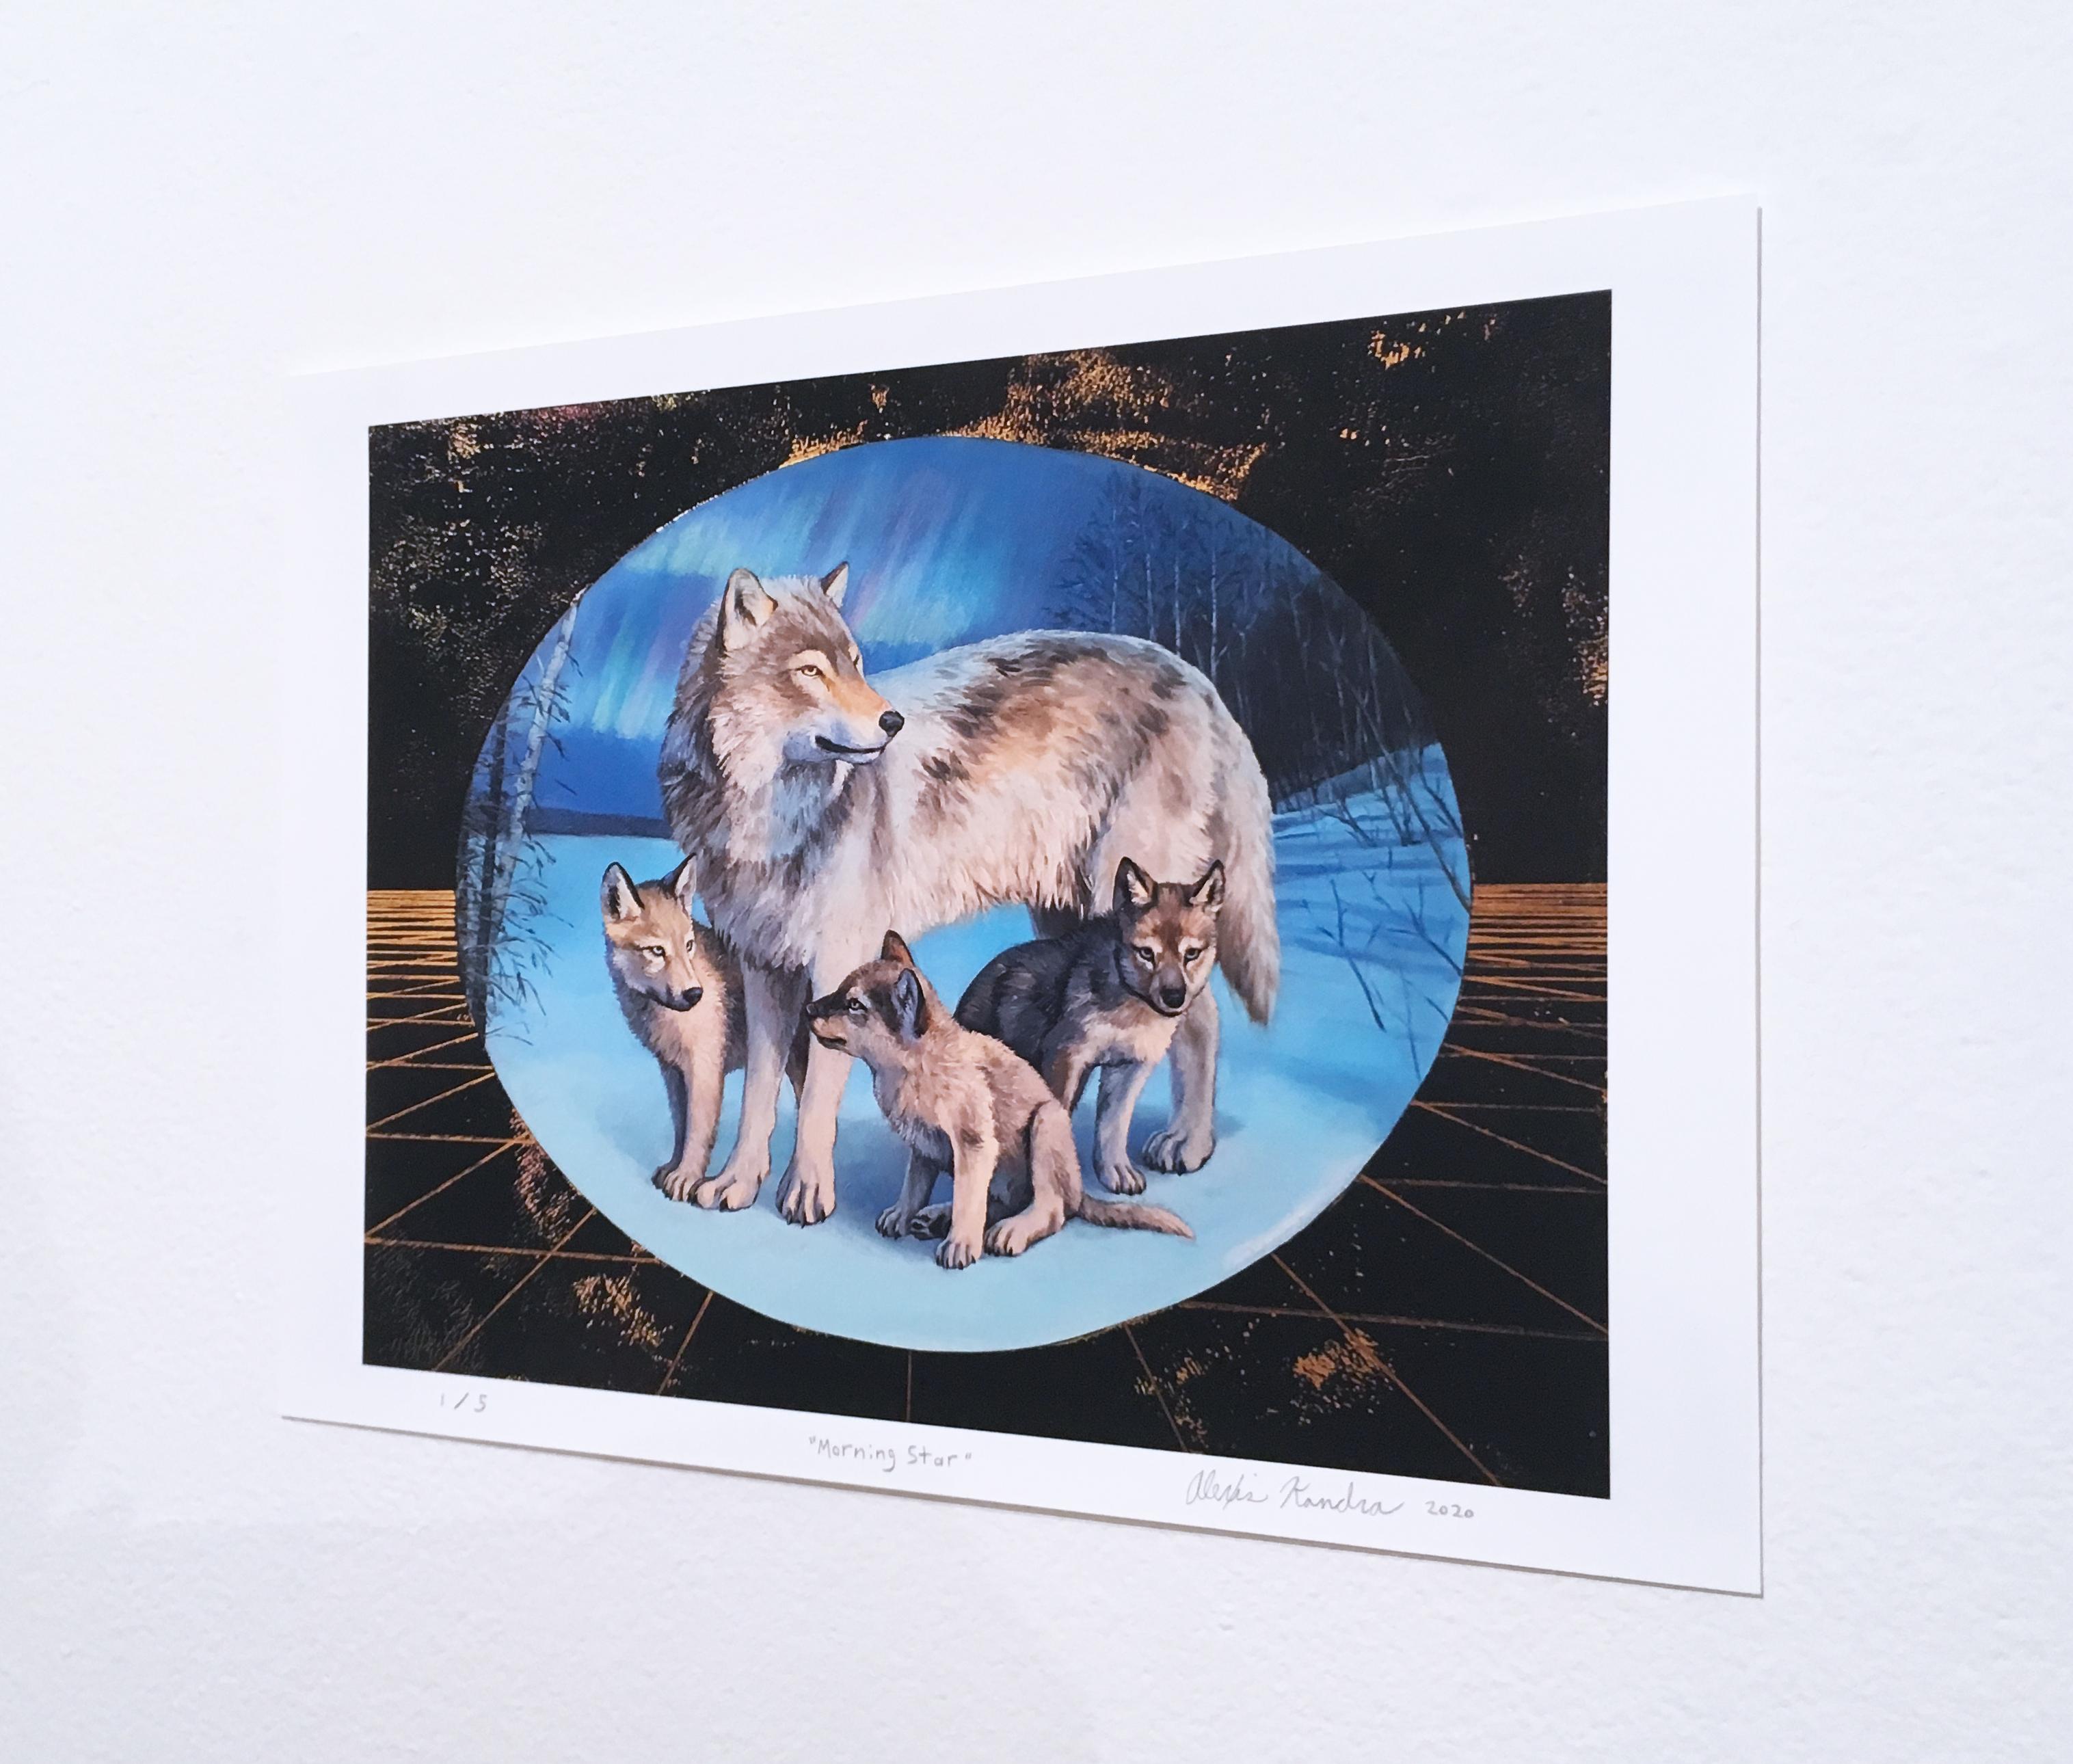 Morning Star, landscape, skyscape, mother wolf, cubs, wildlife, gold, blue print - Print by Alexis Kandra